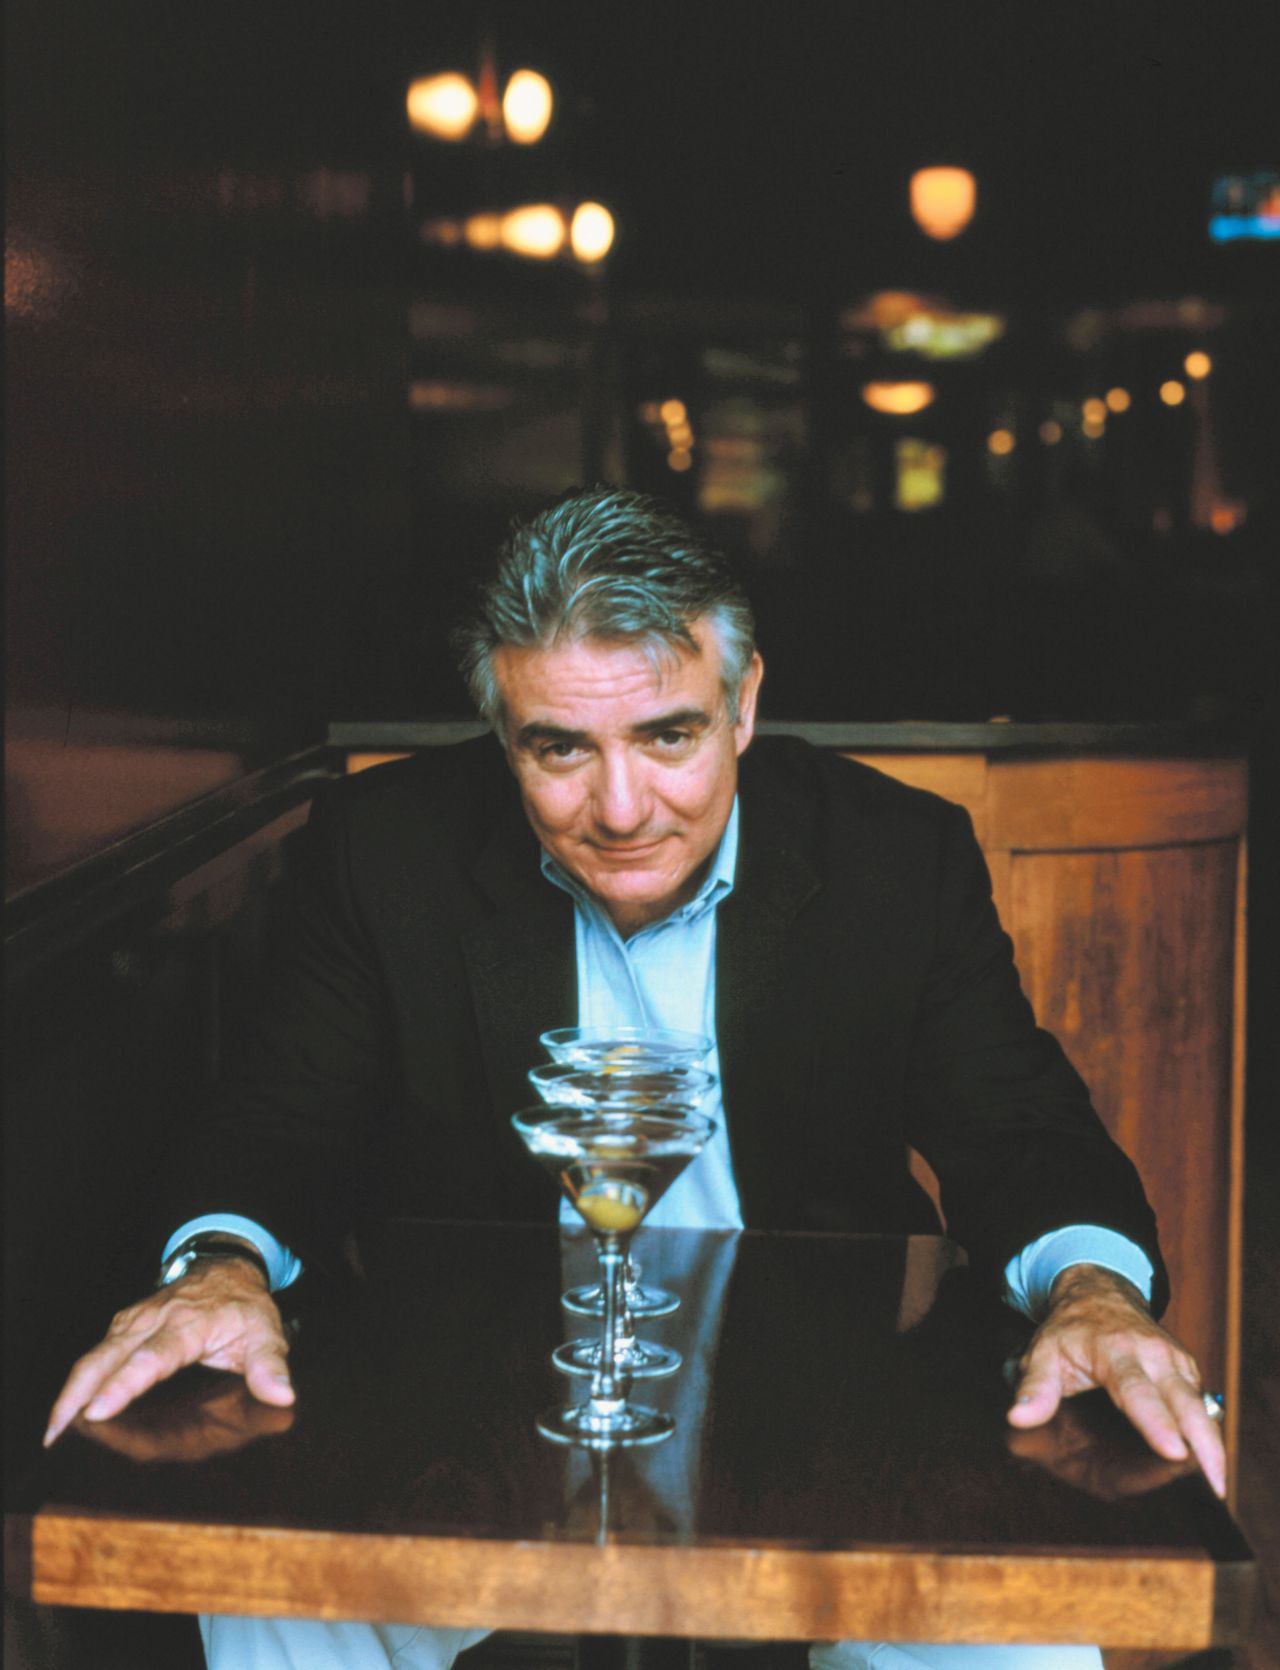 Dale DeGroff, the man who revived the term, says he first referred himself as a master mixologist when he started using fresh ingredients and juices while tending bar at New York's Rainbow Room in the 1980s.